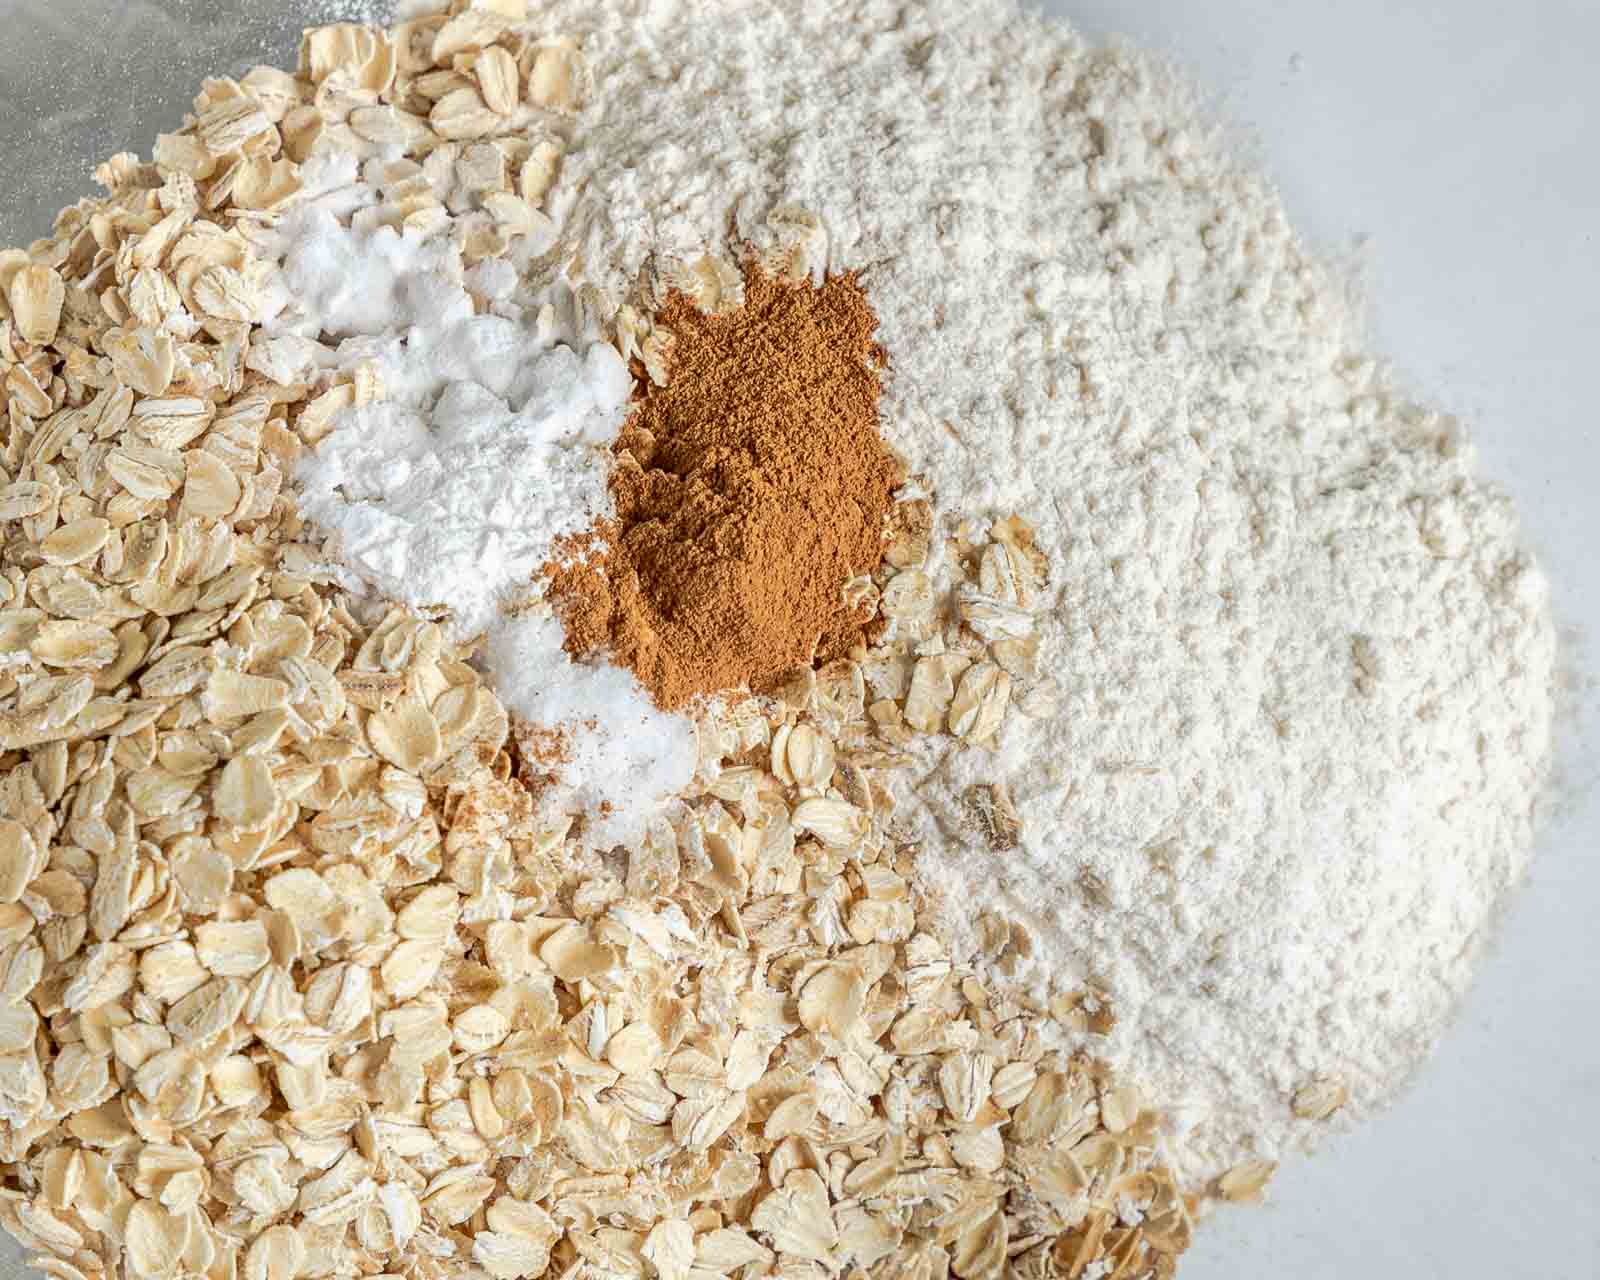 Dry ingredients added to a bowl including oats, flour, cinnamon, baking soda, salt and baking powder.